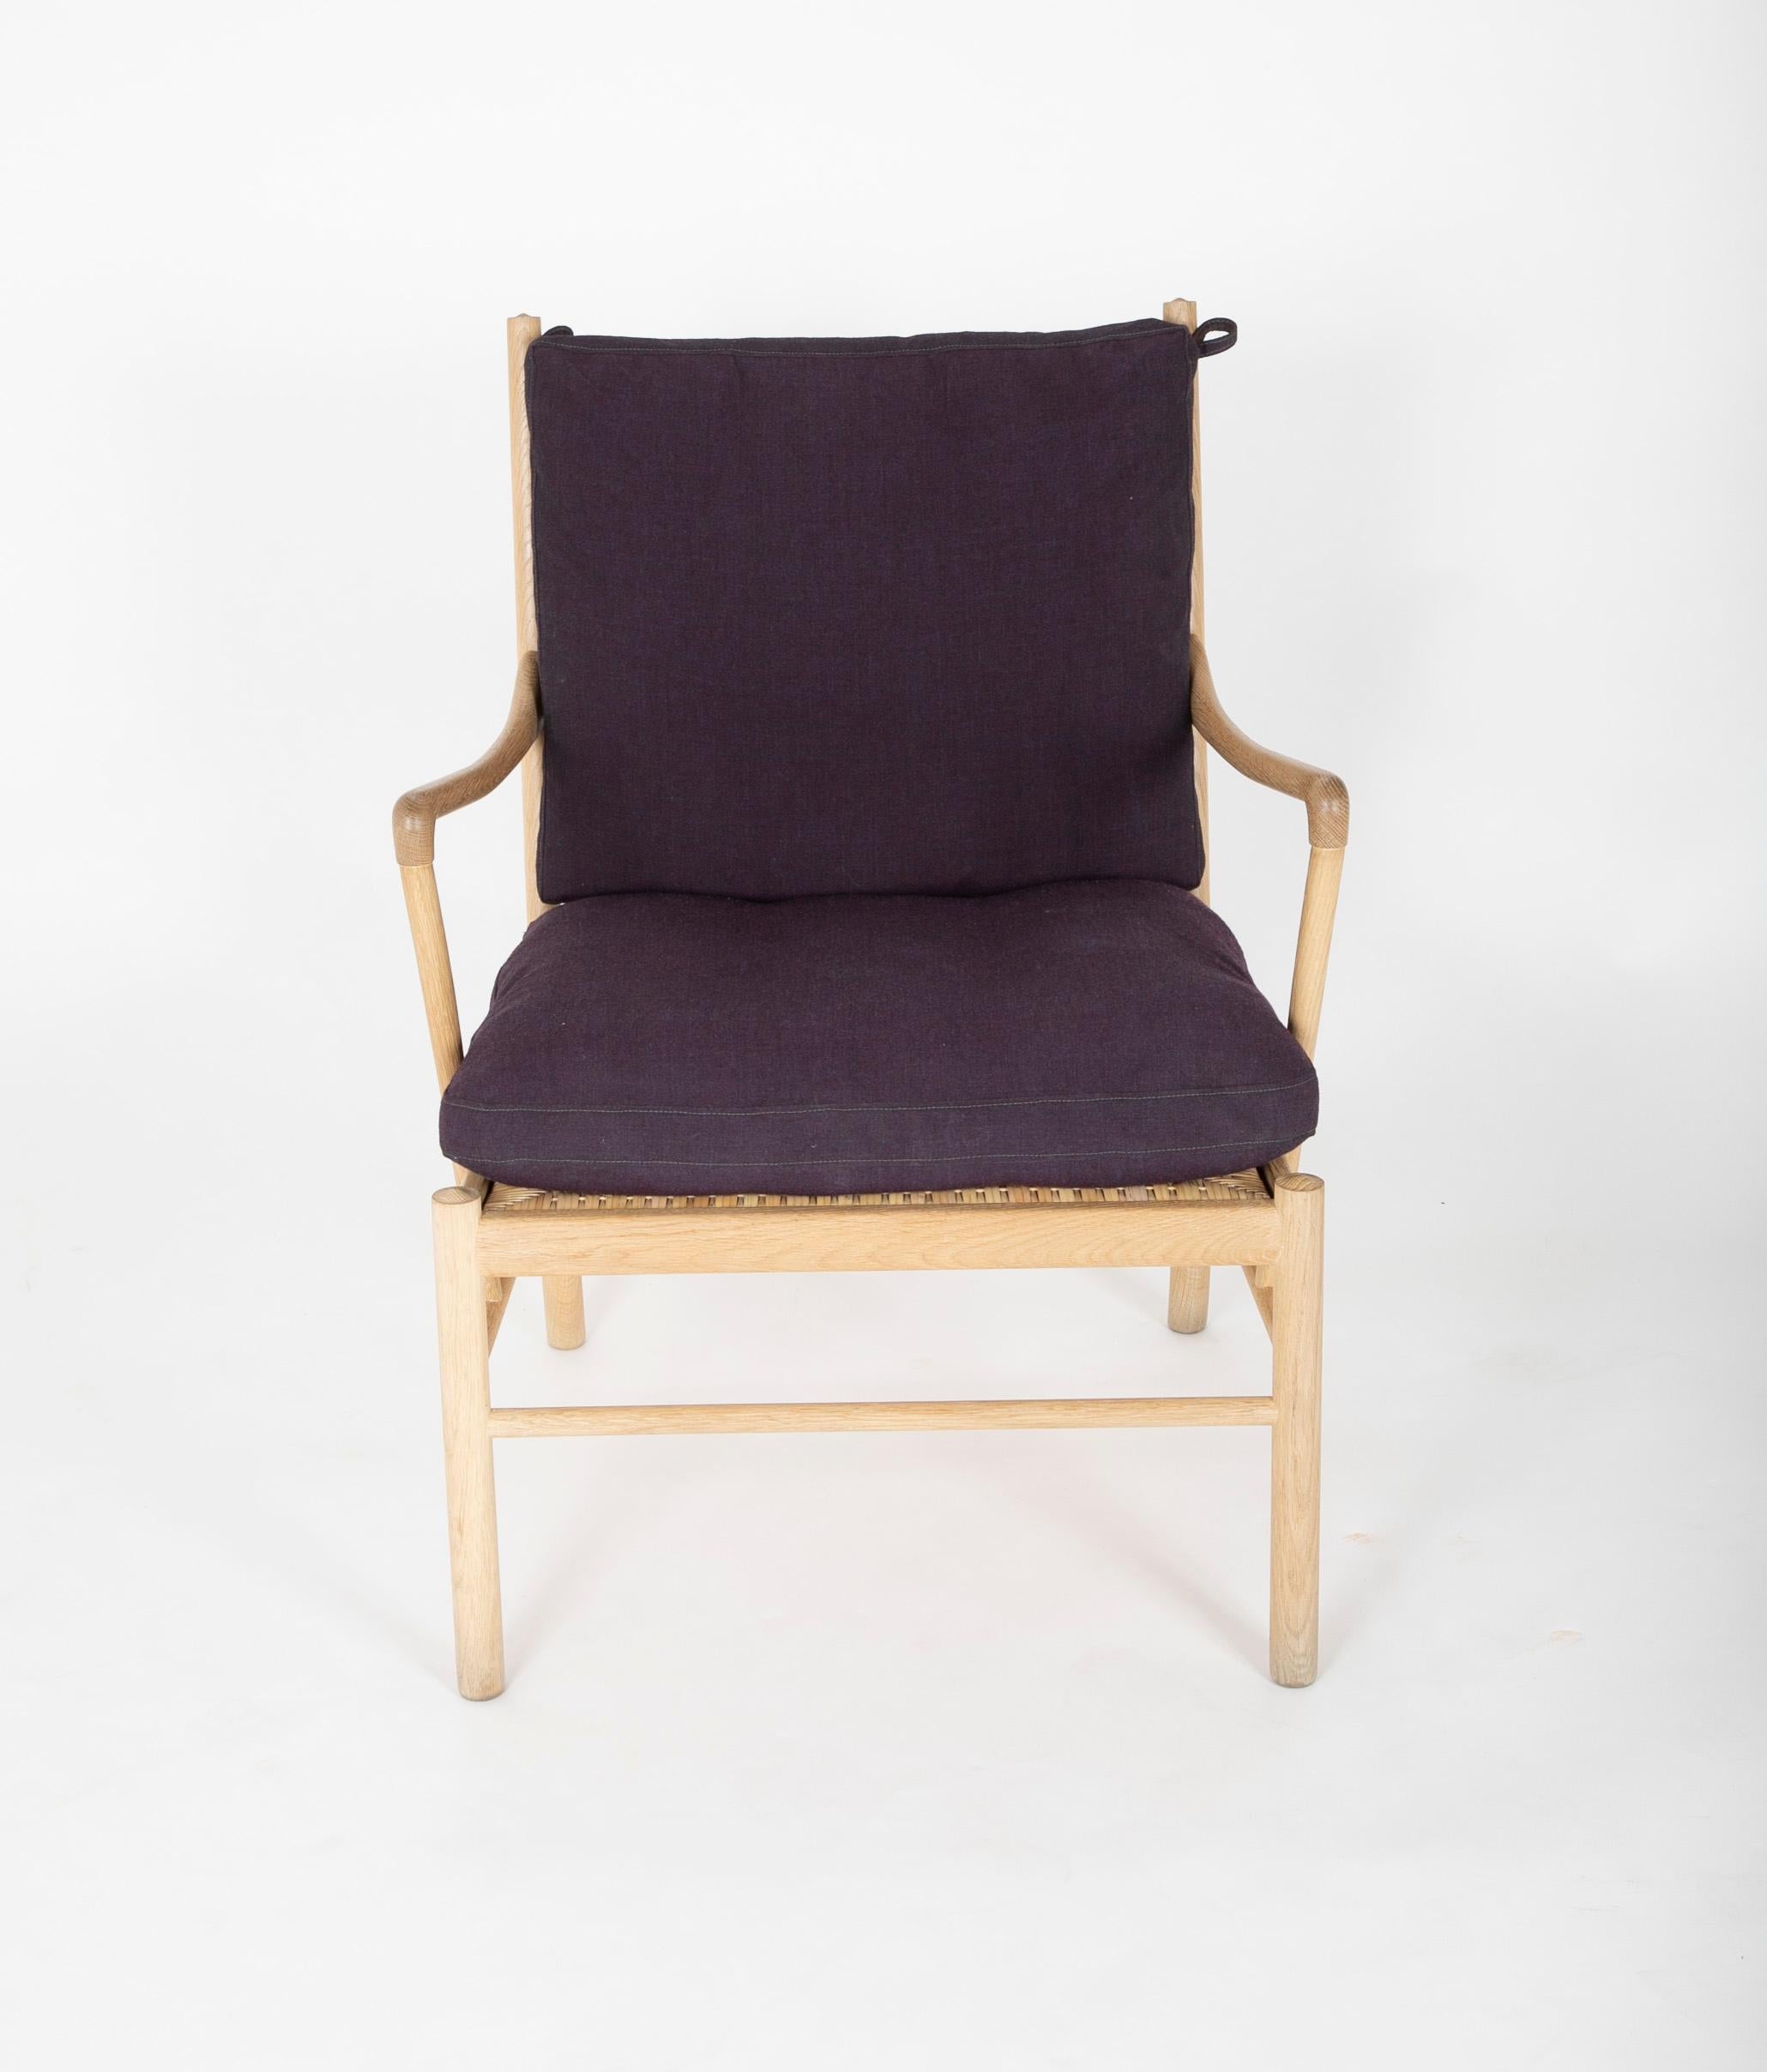 Ole Wanscher 'Colonial Chair' (OW 149) for Carl Hansen & Sons. Chair frame is oak with drop in caned frame seat and purple canvas cushions.